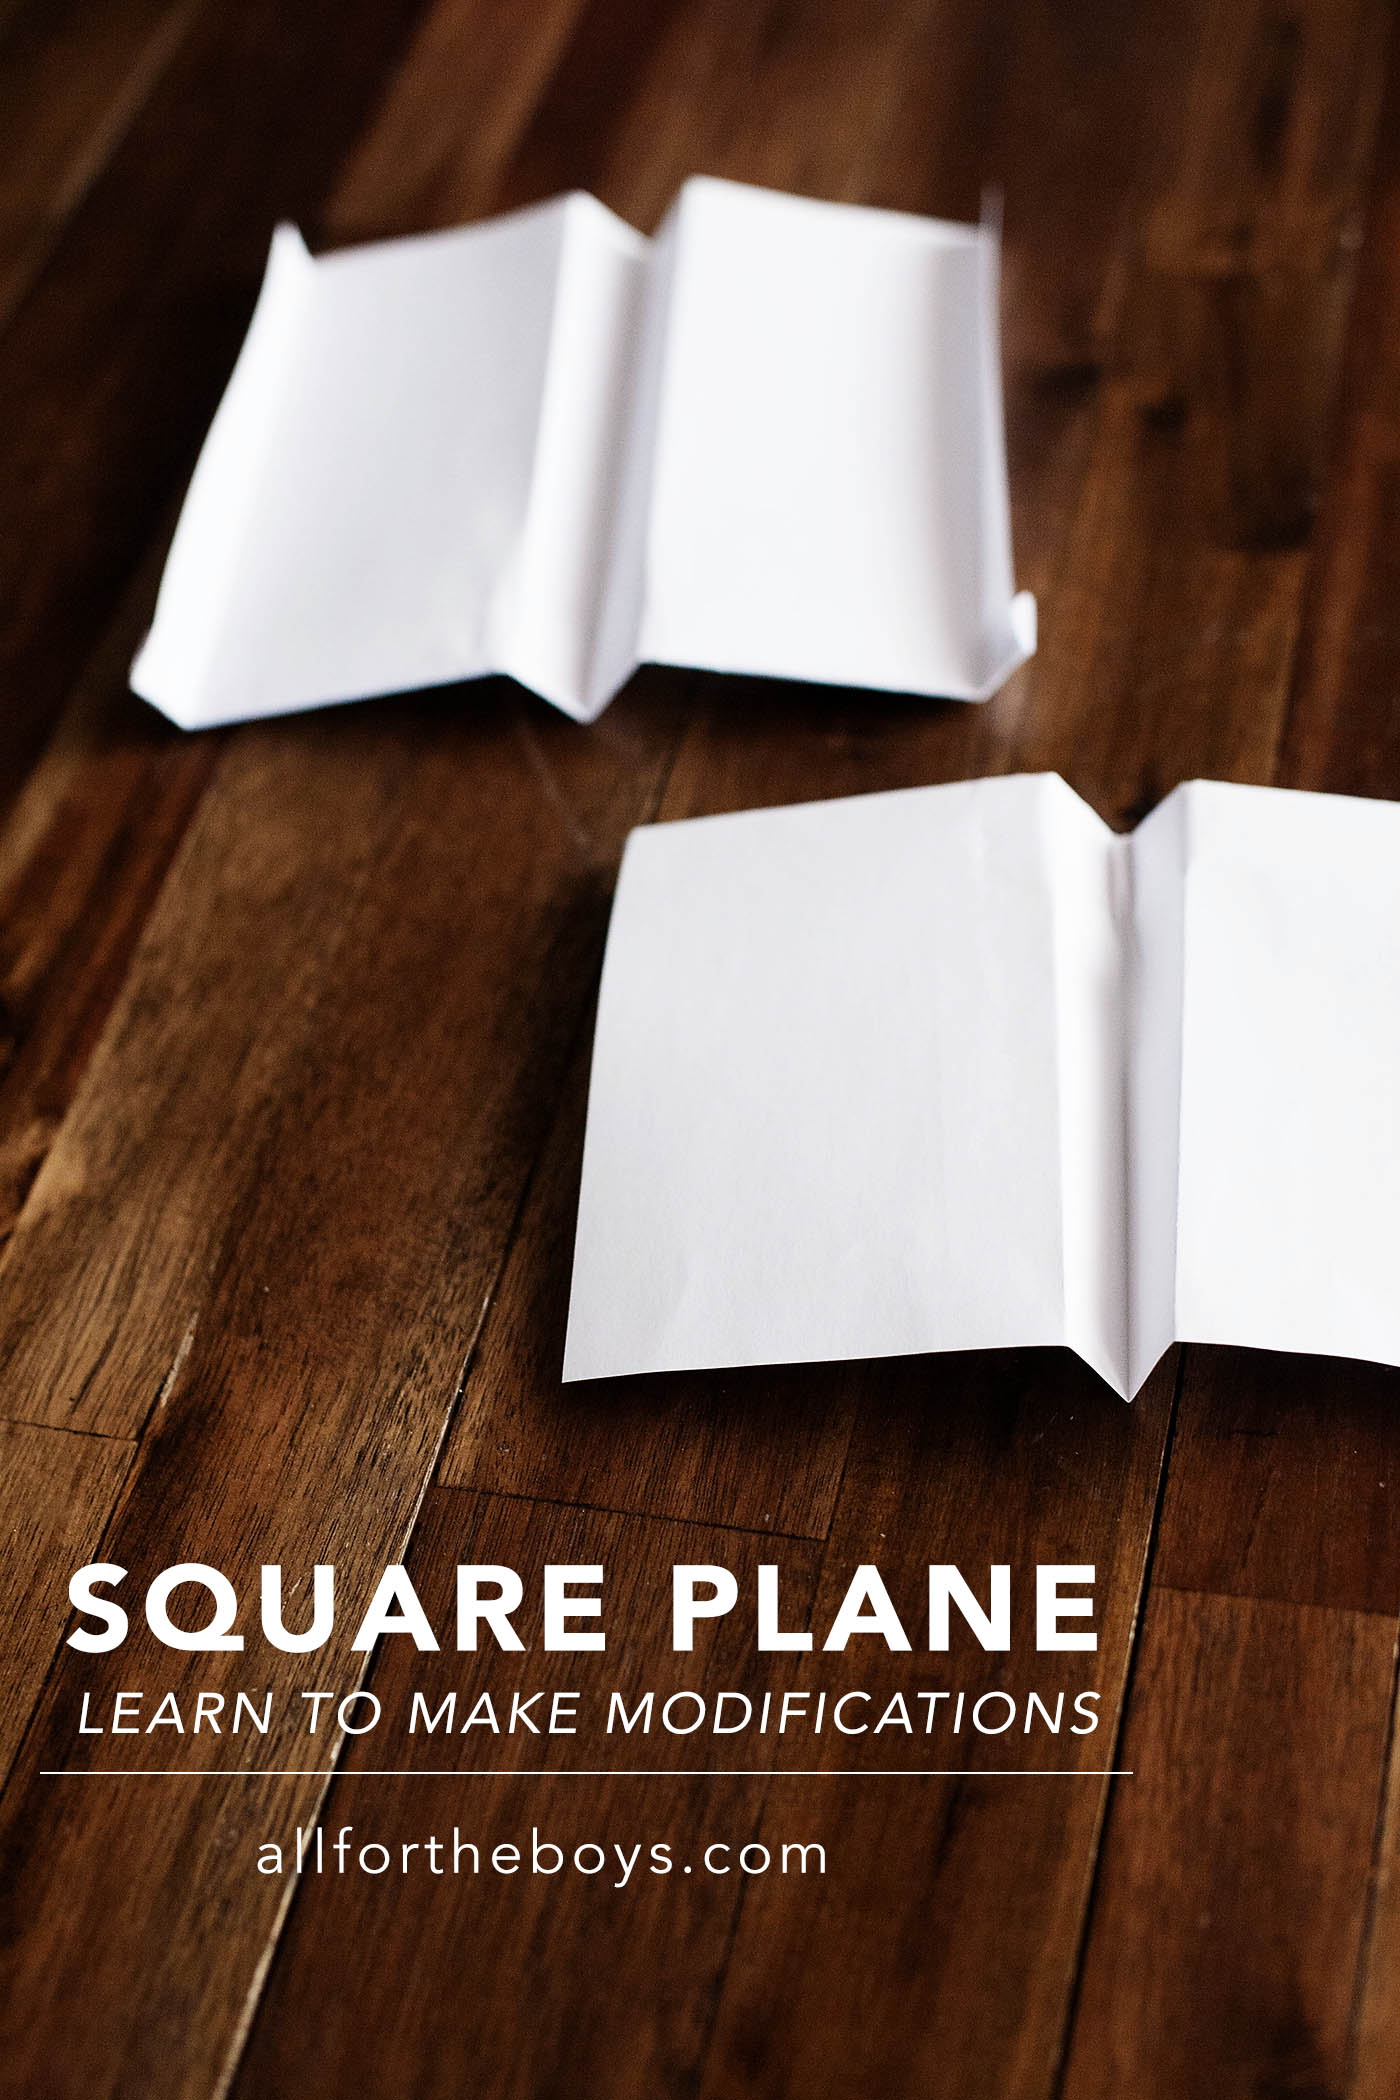 Square plane - great first plane and for learning to make modifications.